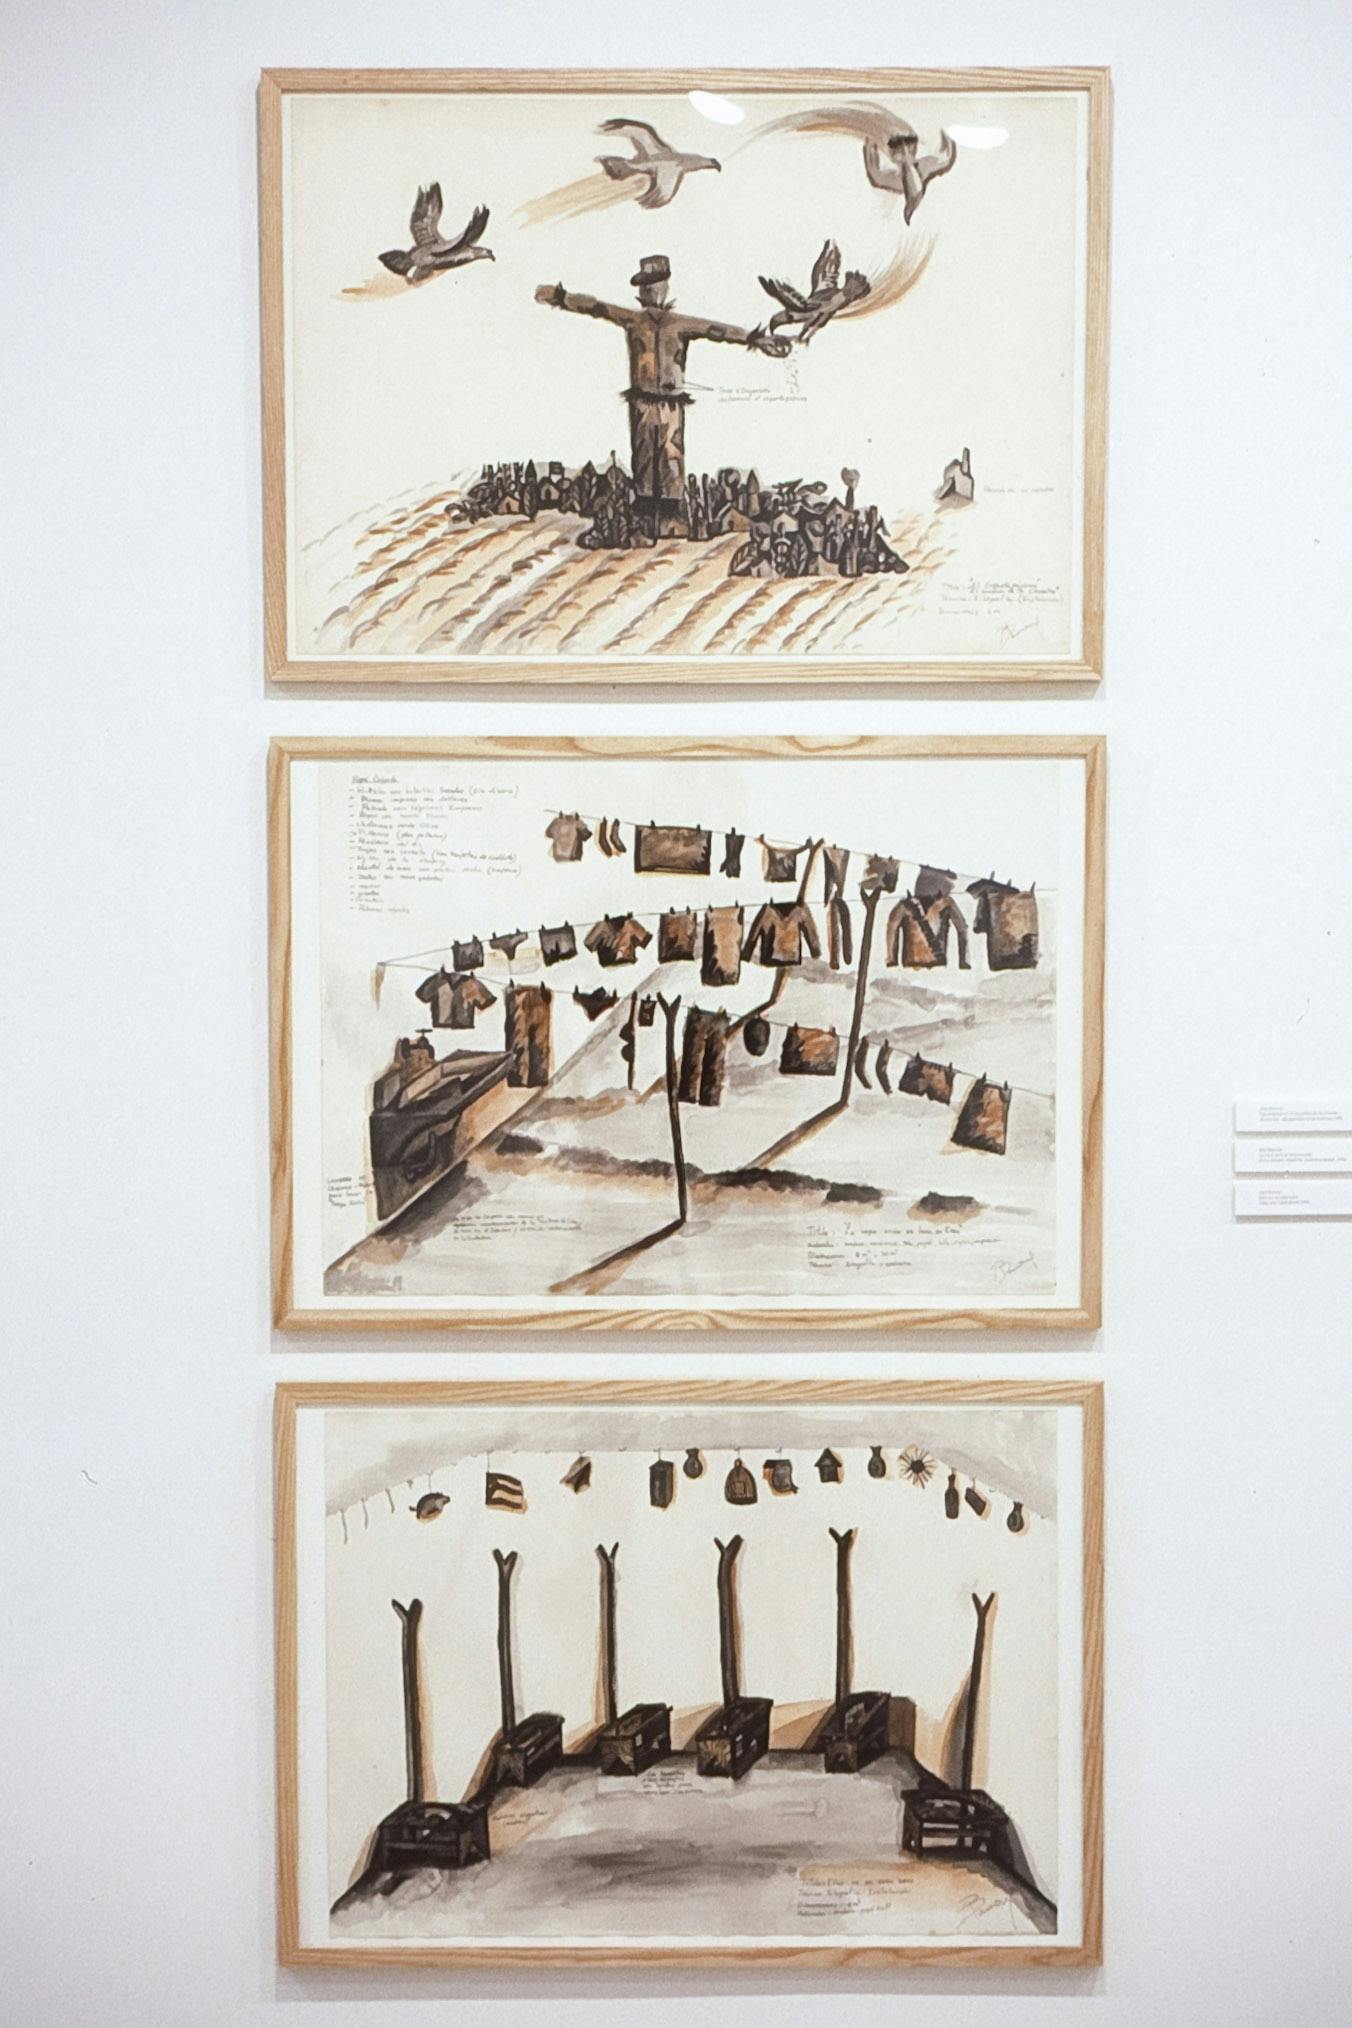 A set of three drawings are vertically aligned on the gallery wall. The top image shows a large scarecrow standing in the middle of the village. The middle piece shows clothes being hung to be dried. 